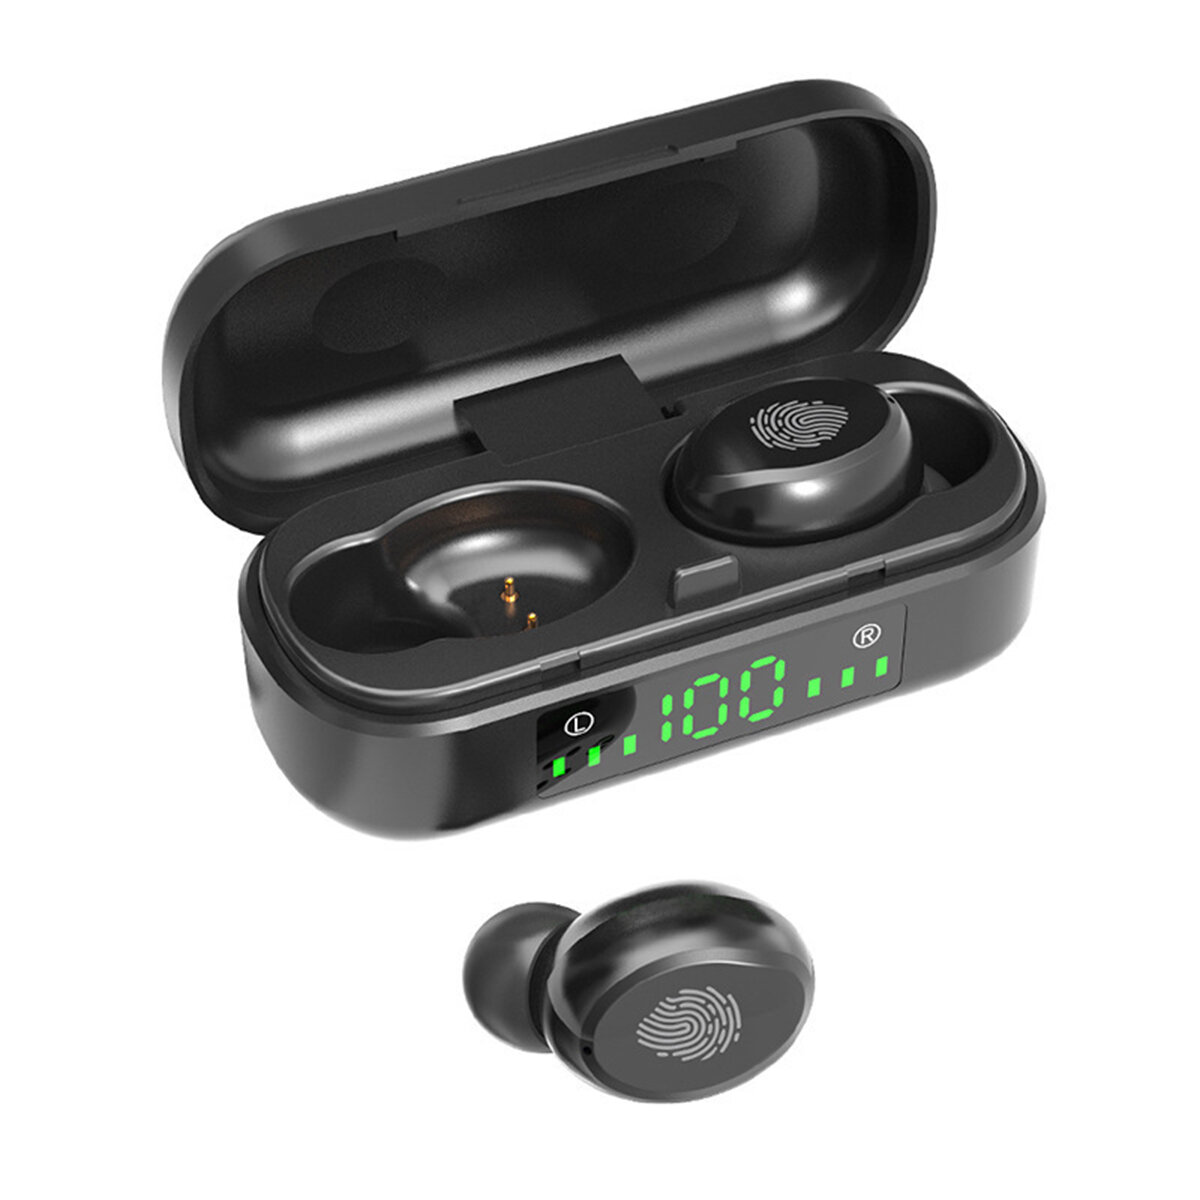 

V8-1 TWS bluetooth 5.0 Earphone Wireless Earbuds LED Display 5000mAh Power Bank Touch Control Headphone Headset with Mic